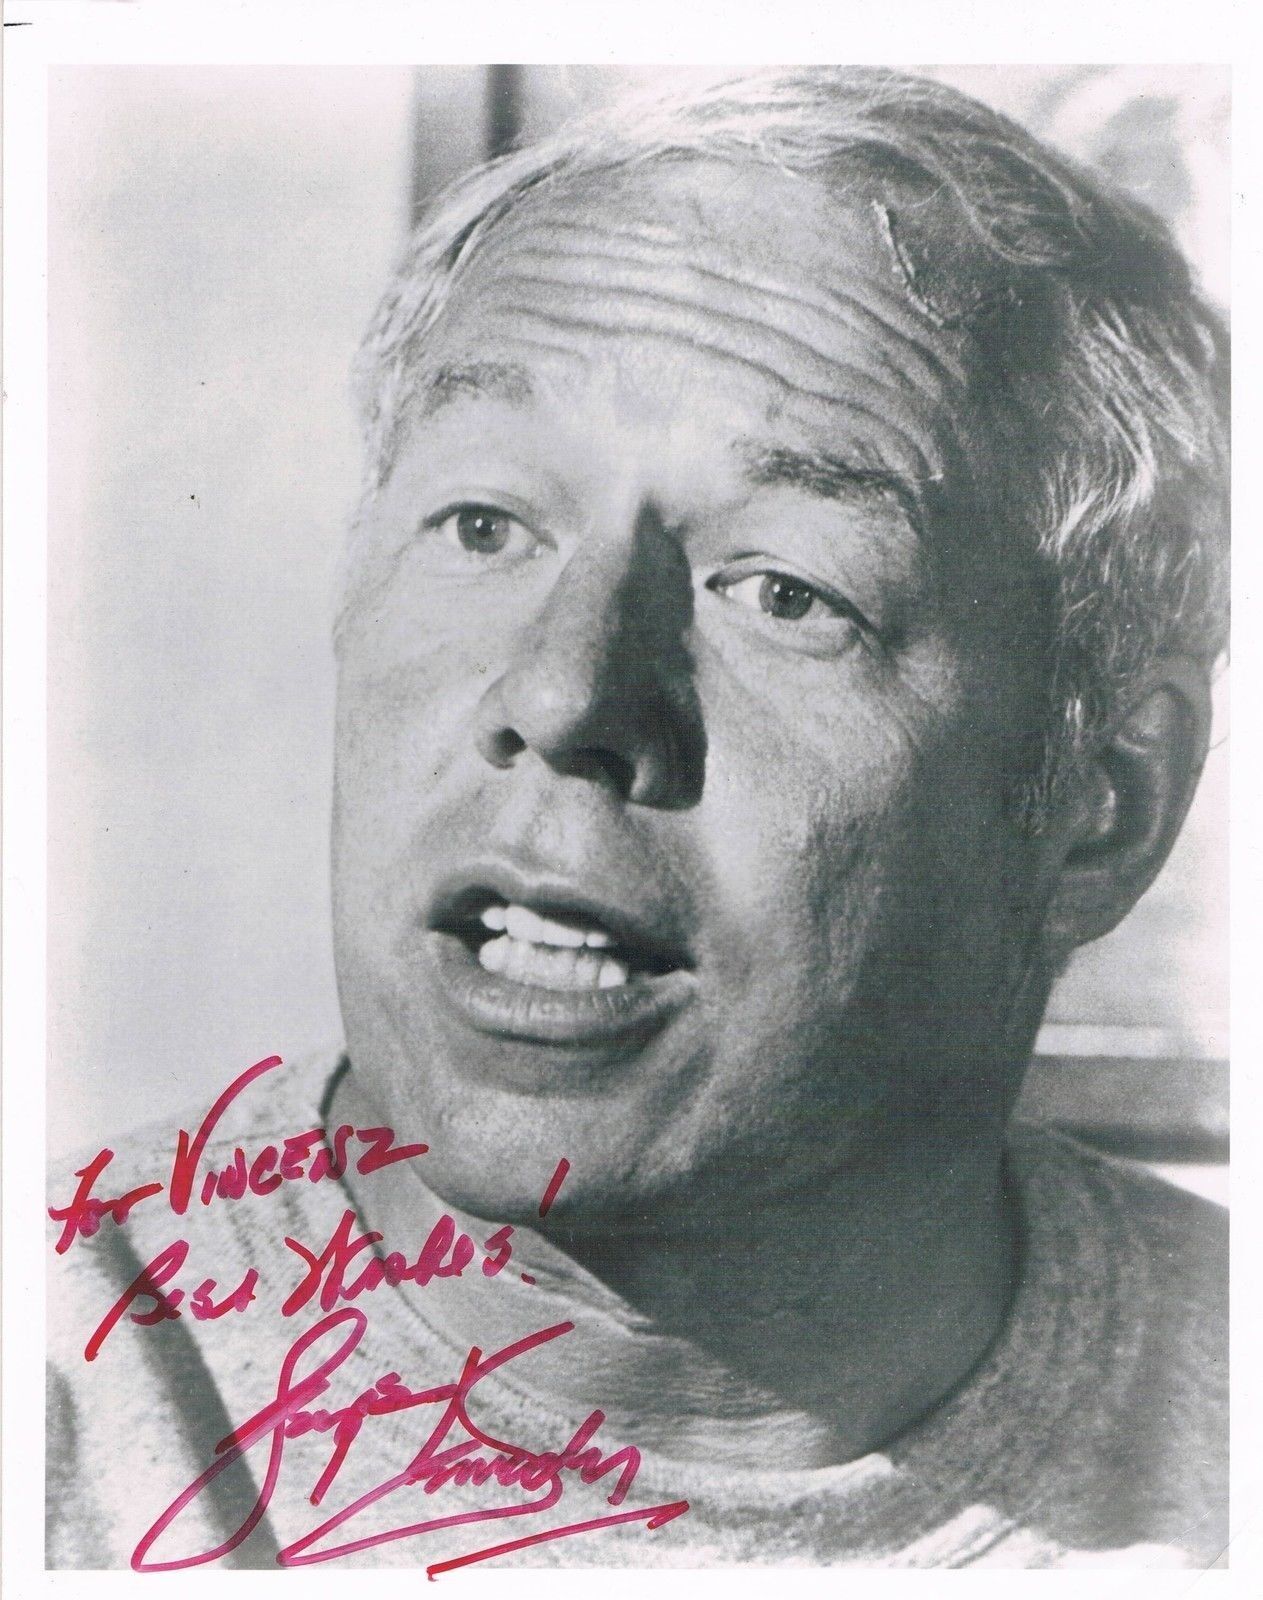 George Kennedy 1925-2016 genuine autograph Photo Poster painting 8x10